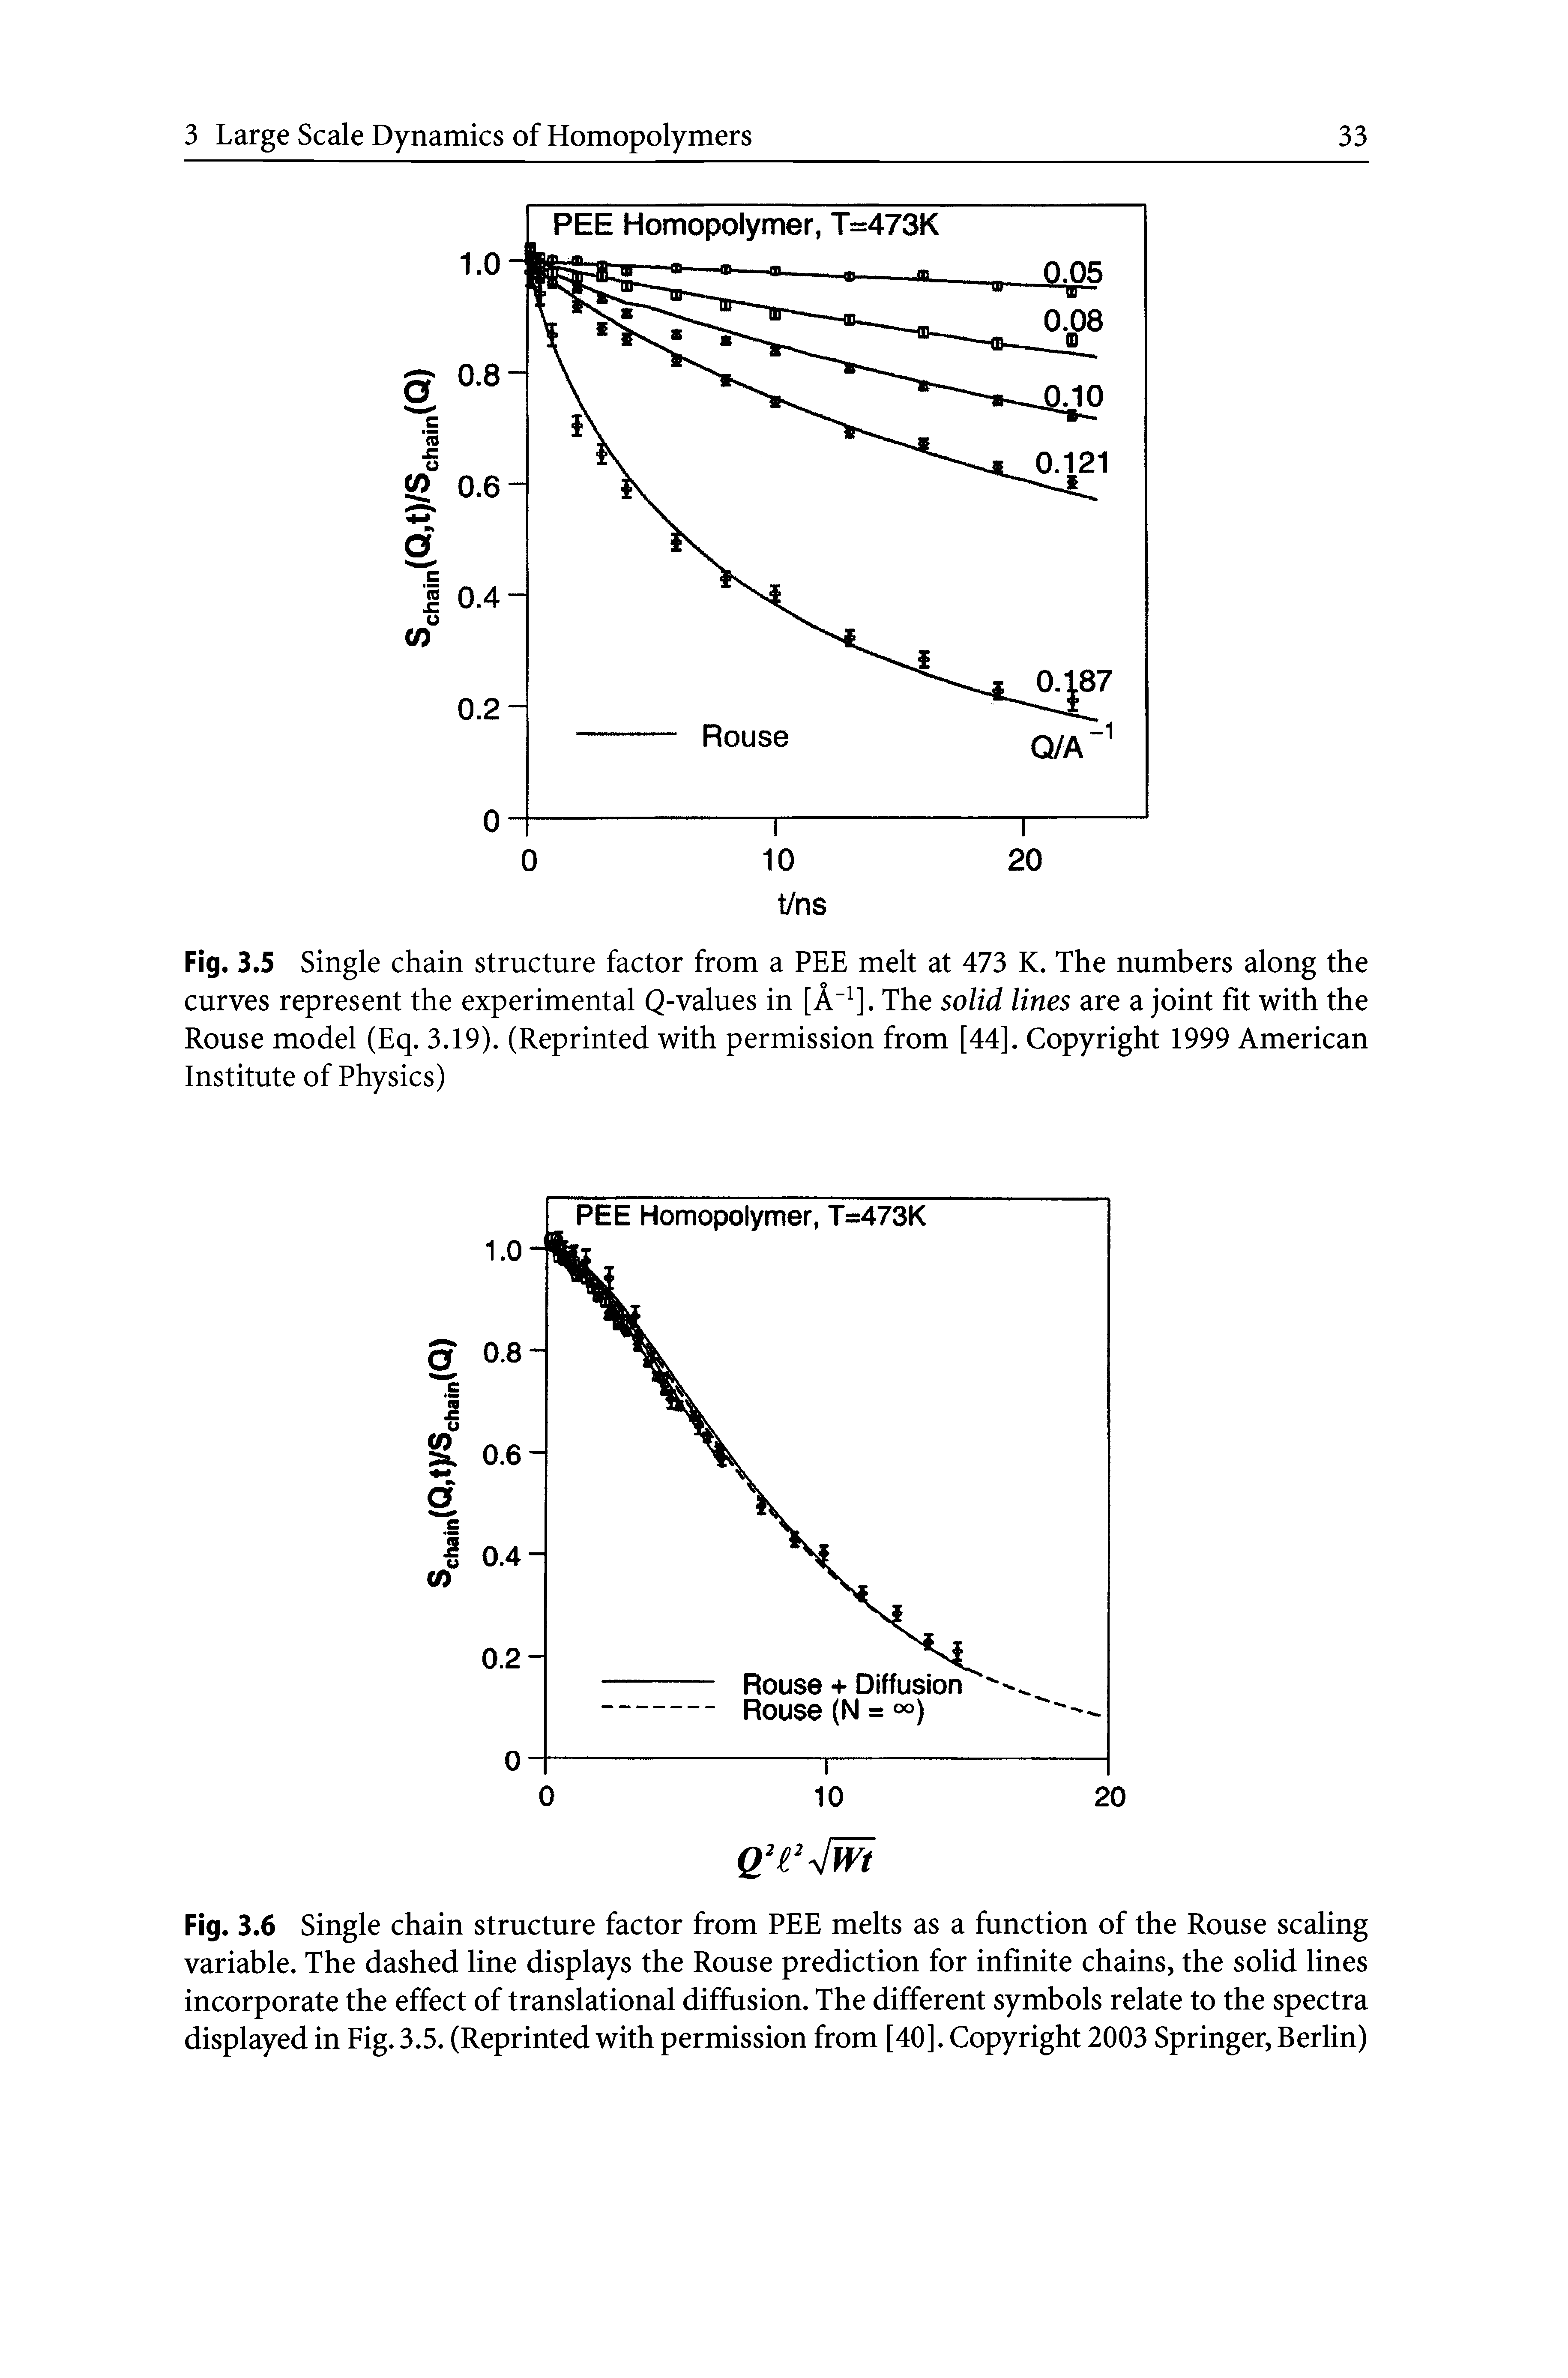 Fig. 3.5 Single chain structure factor from a PEE melt at 473 K. The numbers along the curves represent the experimental Q-values in [A ]. The solid lines are a joint fit with the Rouse model (Eq. 3.19). (Reprinted with permission from [44]. Copyright 1999 American Institute of Physics)...